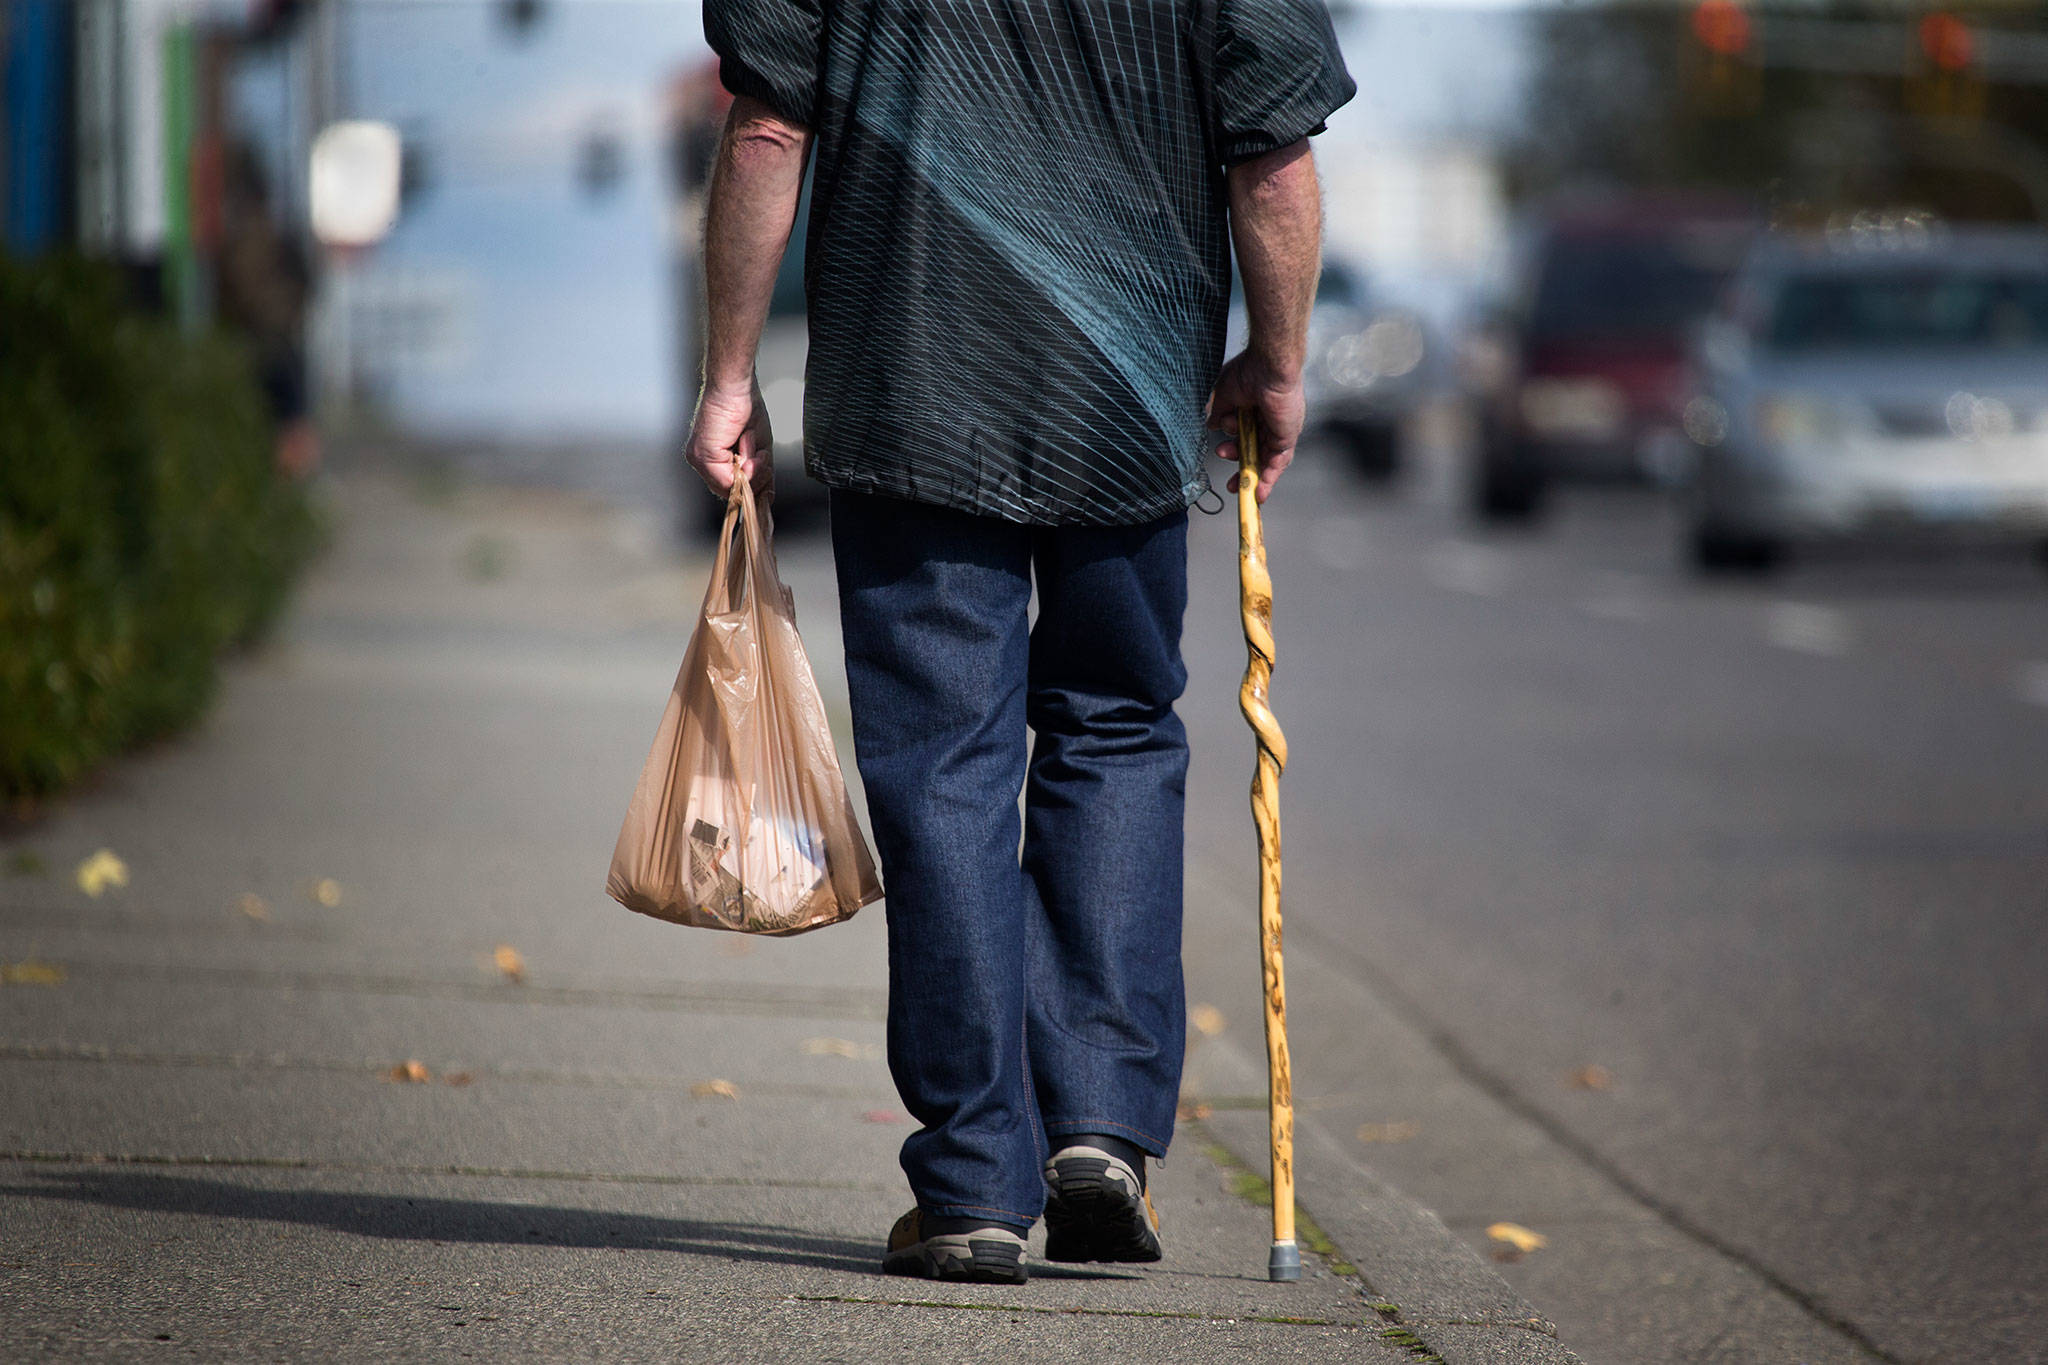 Everett’s ban on single-use plastic bags goes into effect Monday. (Andy Bronson / Herald File)